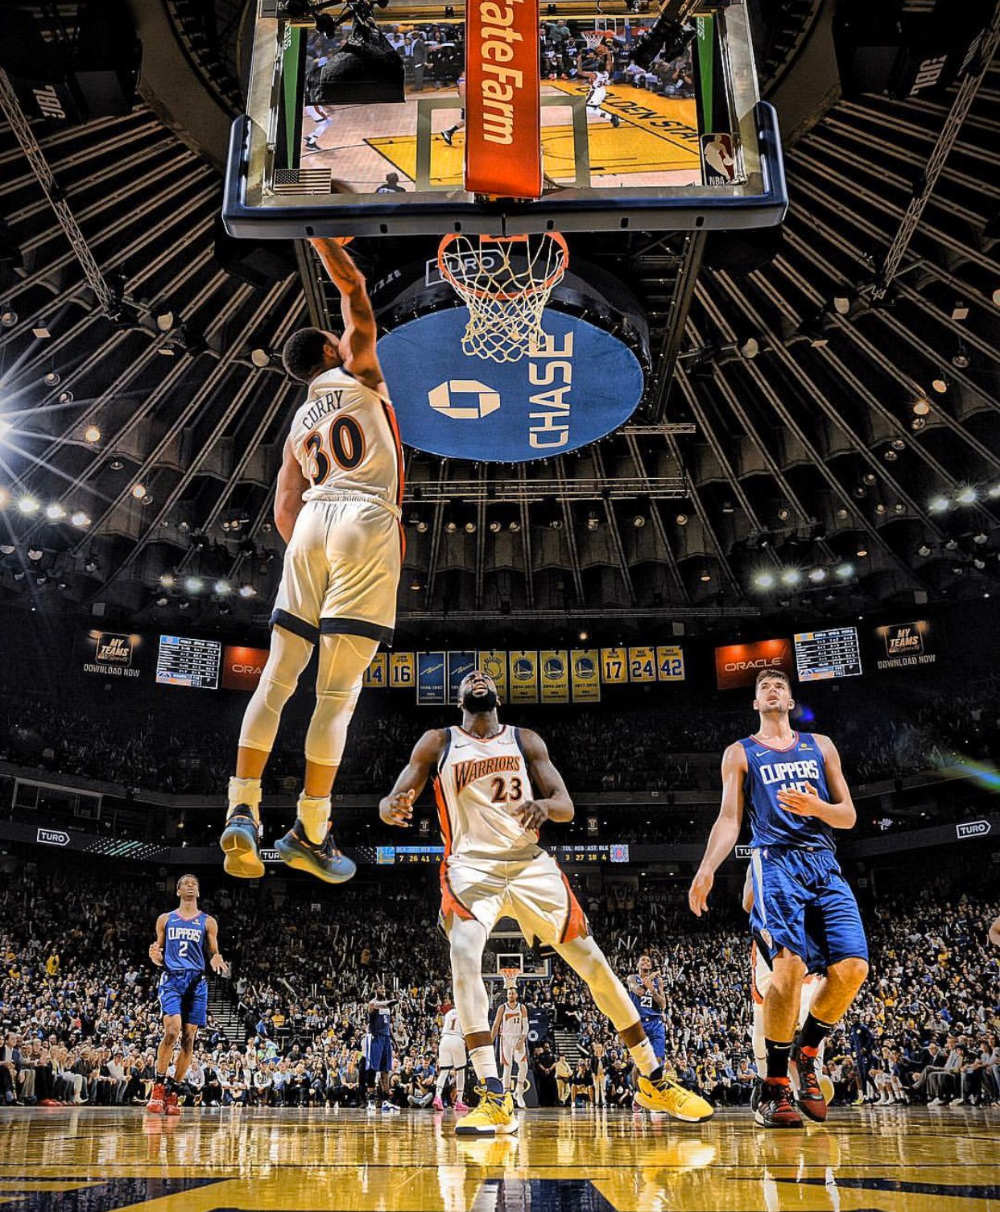 warriorsworld on Twitter. Nba stephen curry, Stephen curry dunk, Basketball picture